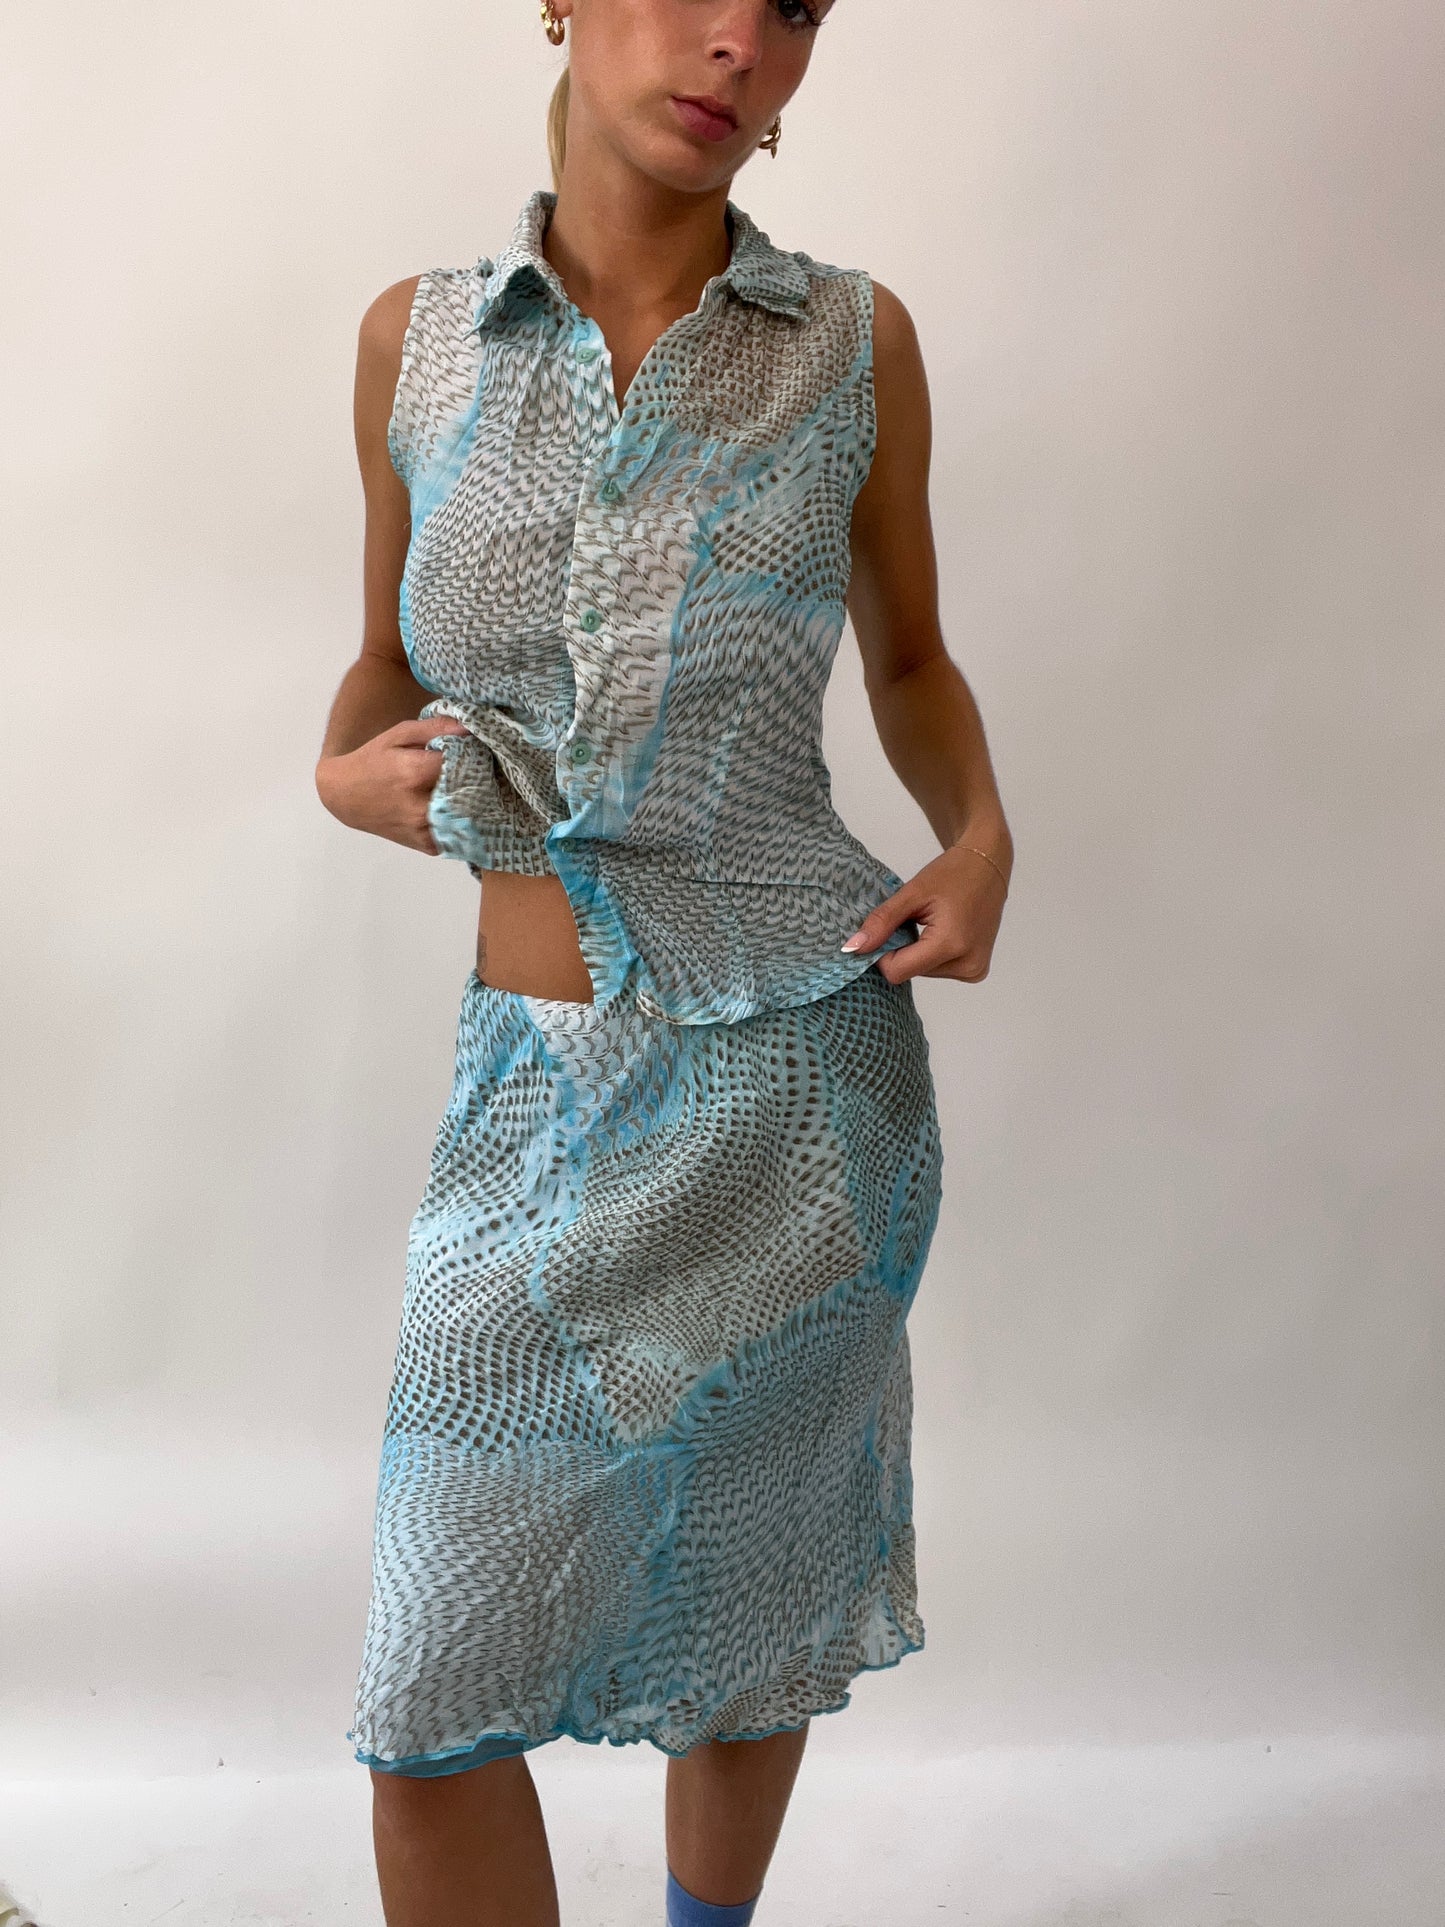 GIRLS TRIP DROP | small blue and grey sheer set with maxi skirt and blouse